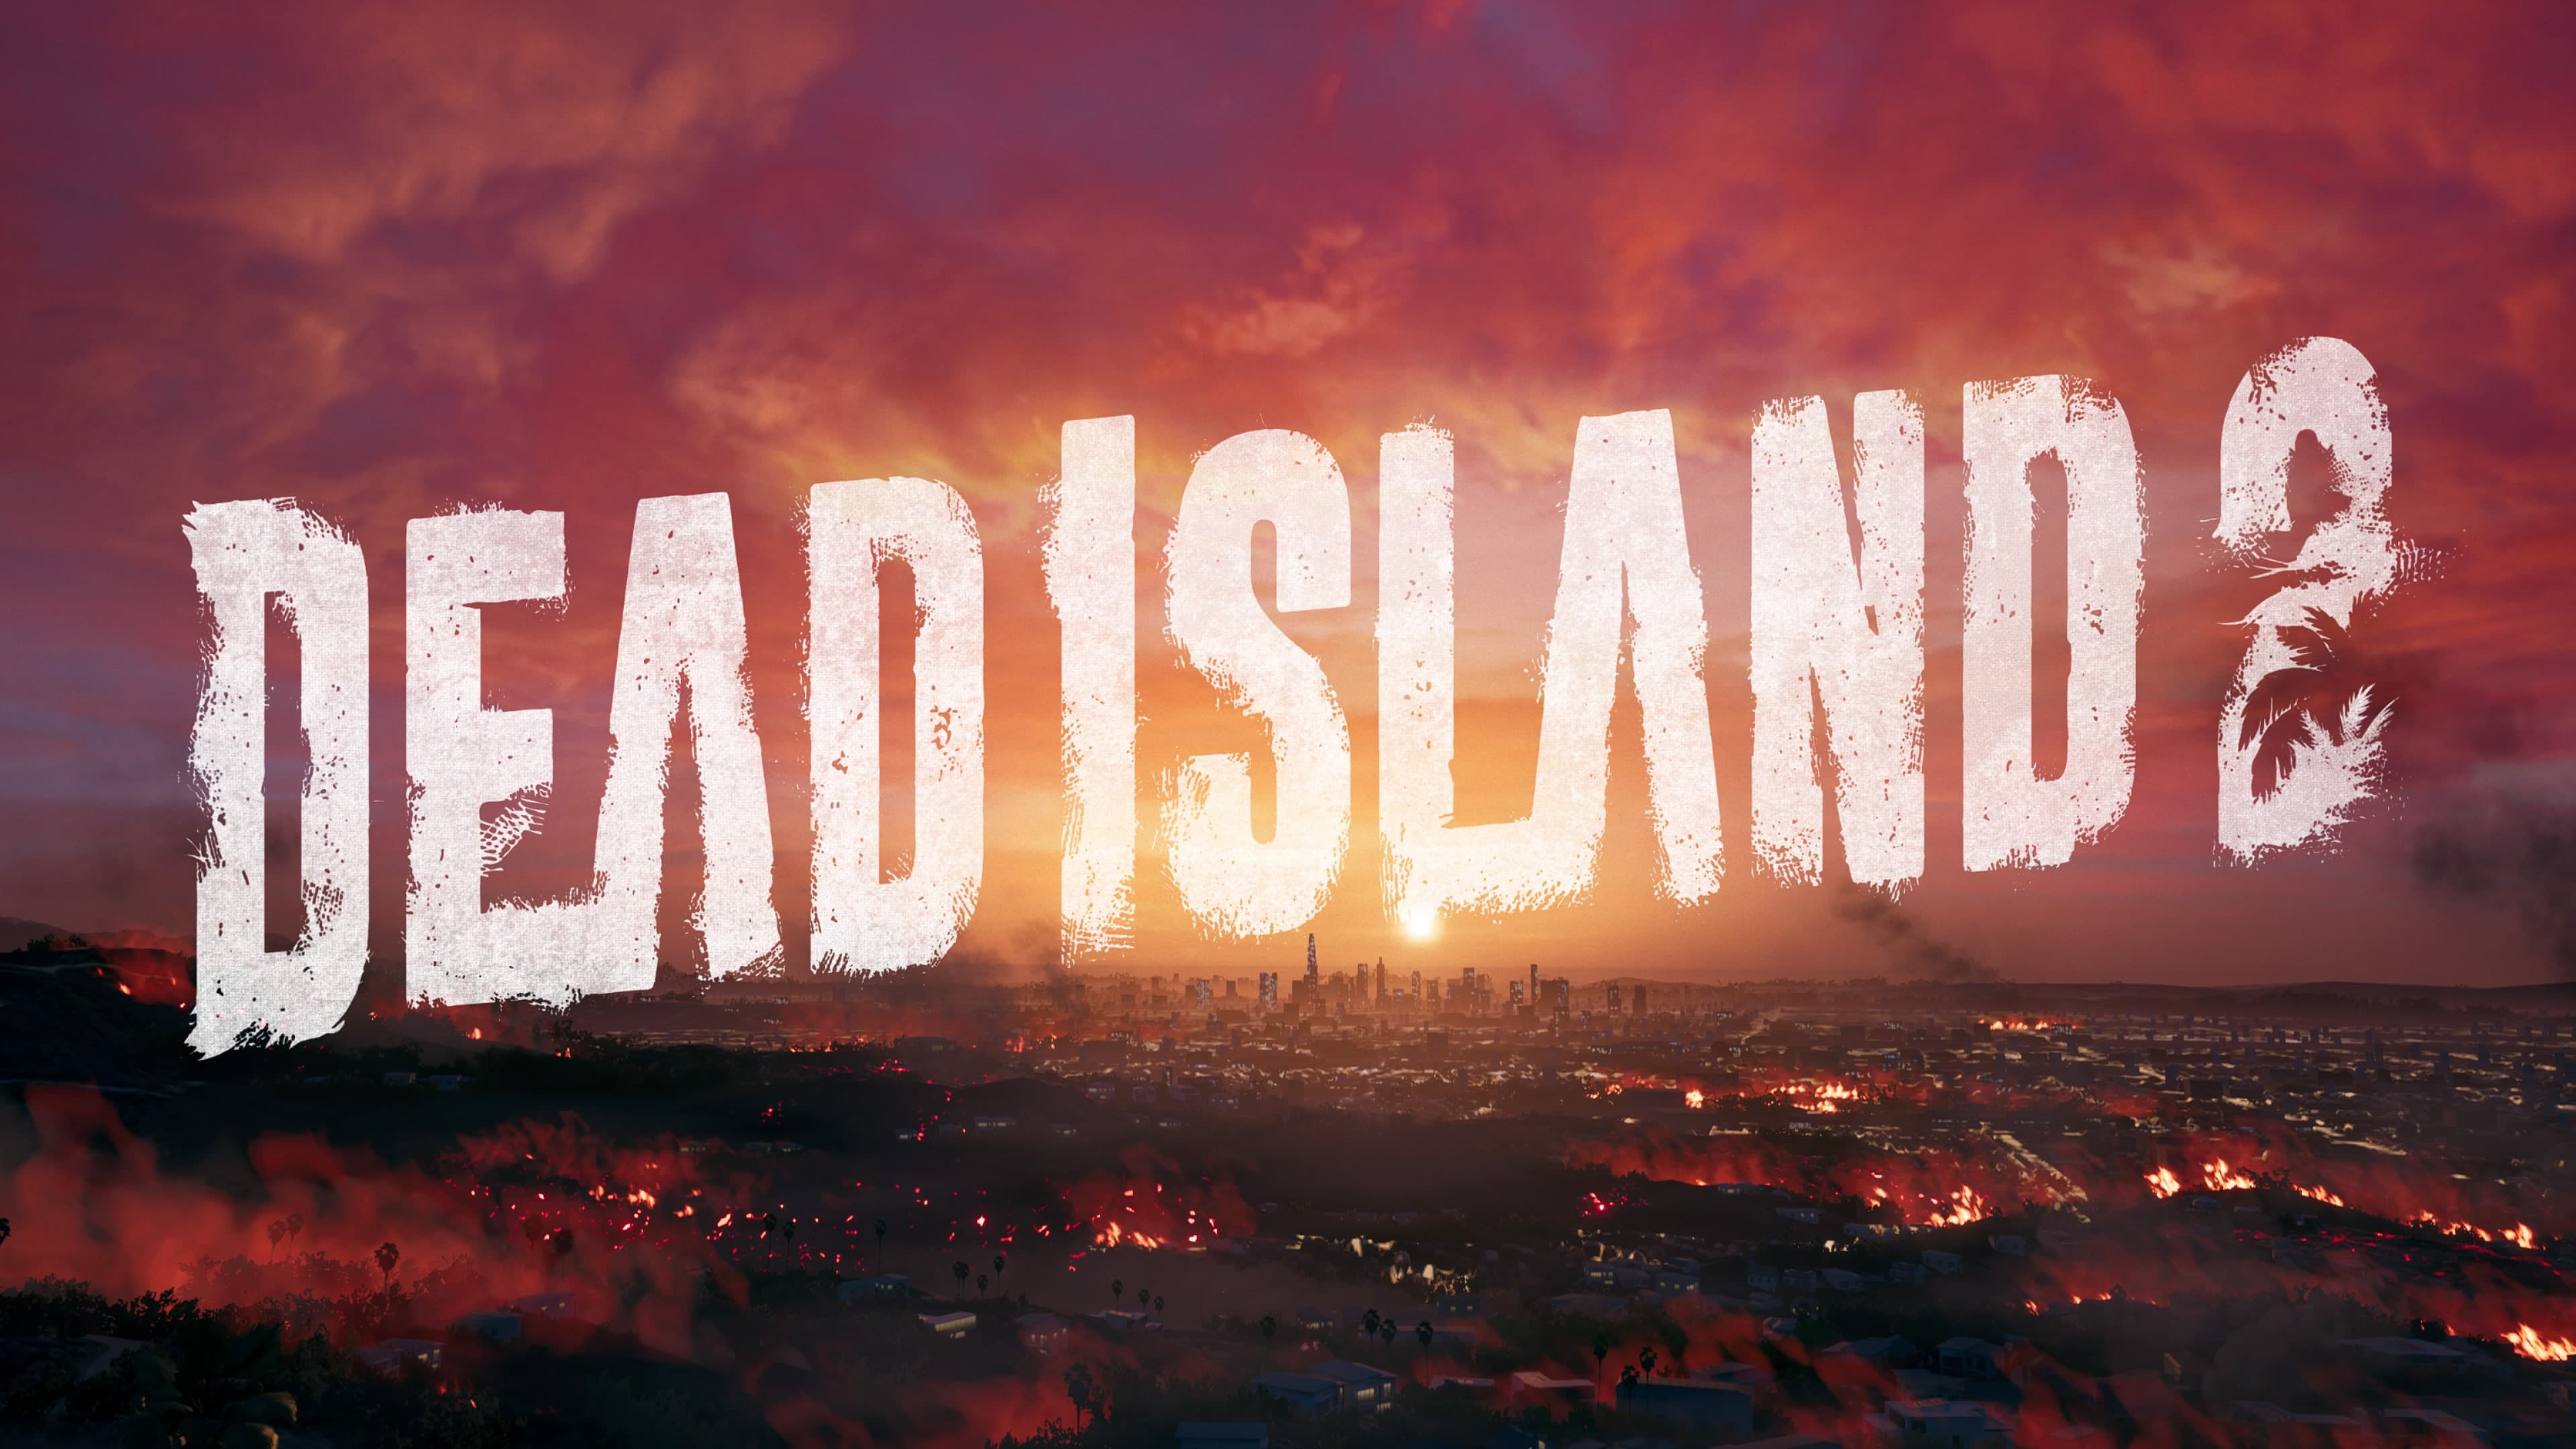 Will Dead Island 2 be Available on Steam? - Answered - Prima Games